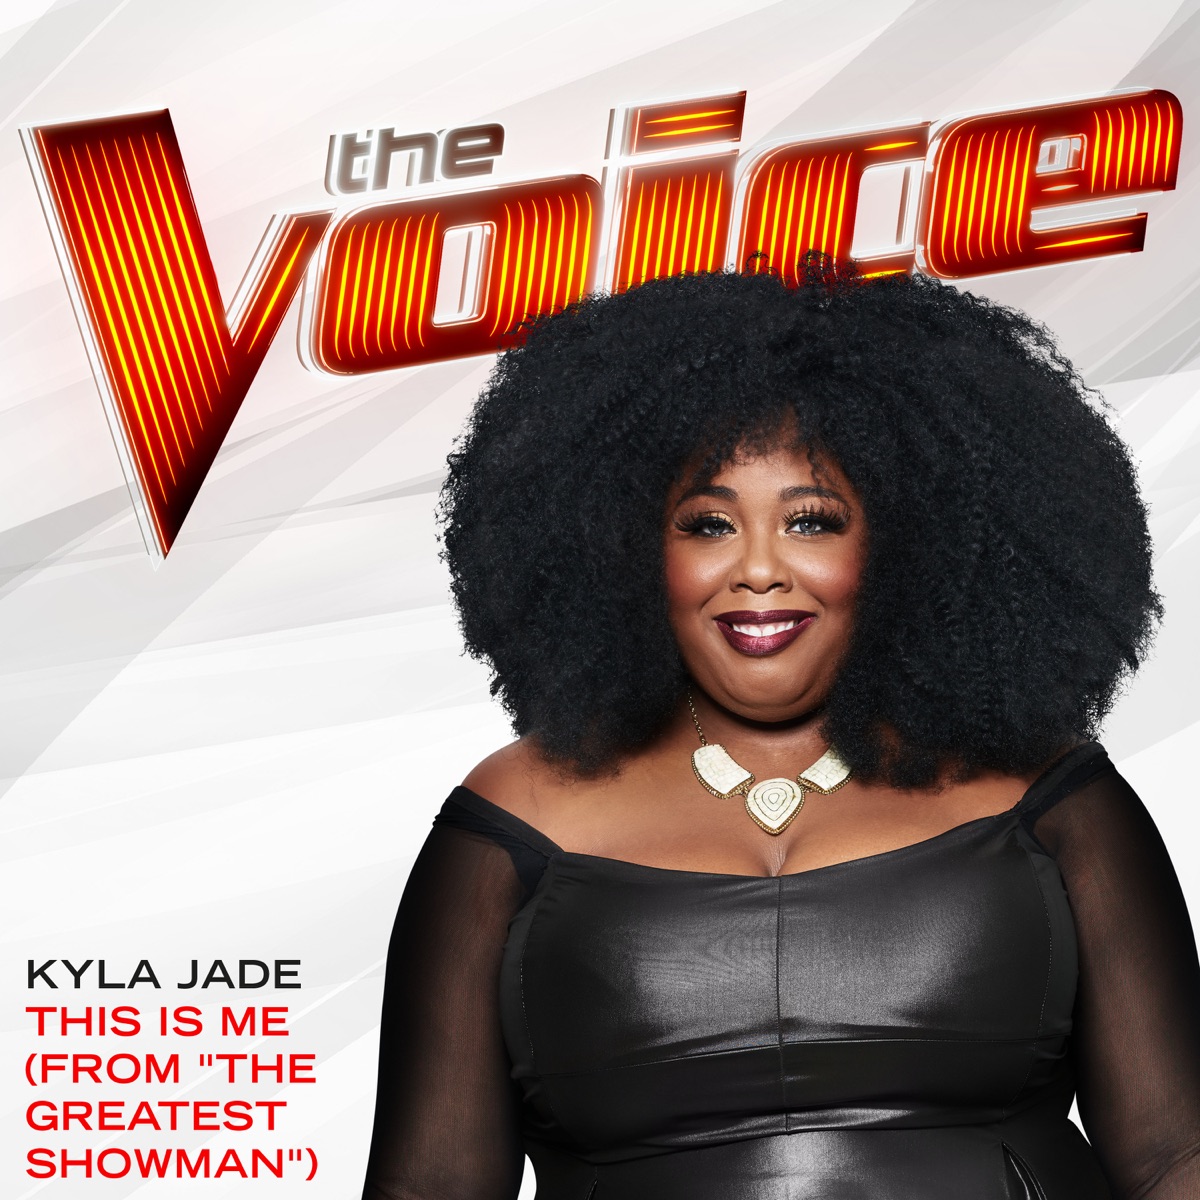 This Is Me (From “The Greatest Showman”) [The Voice Performance] - Single  by Kyla Jade on Apple Music